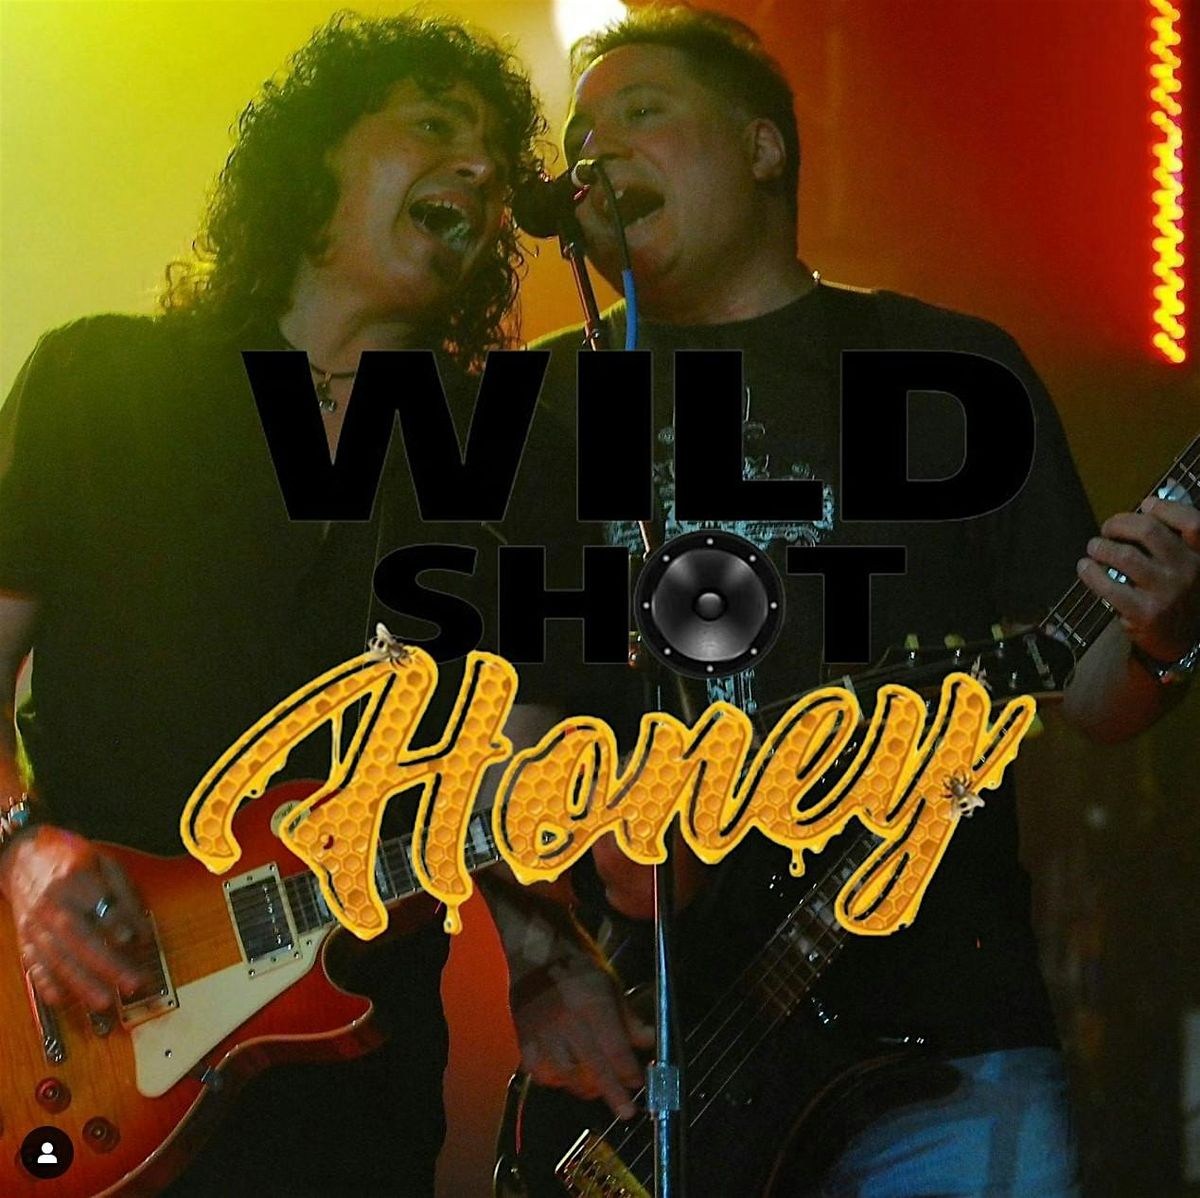 WILD SHOT HONEY band Live at the cat's cradle